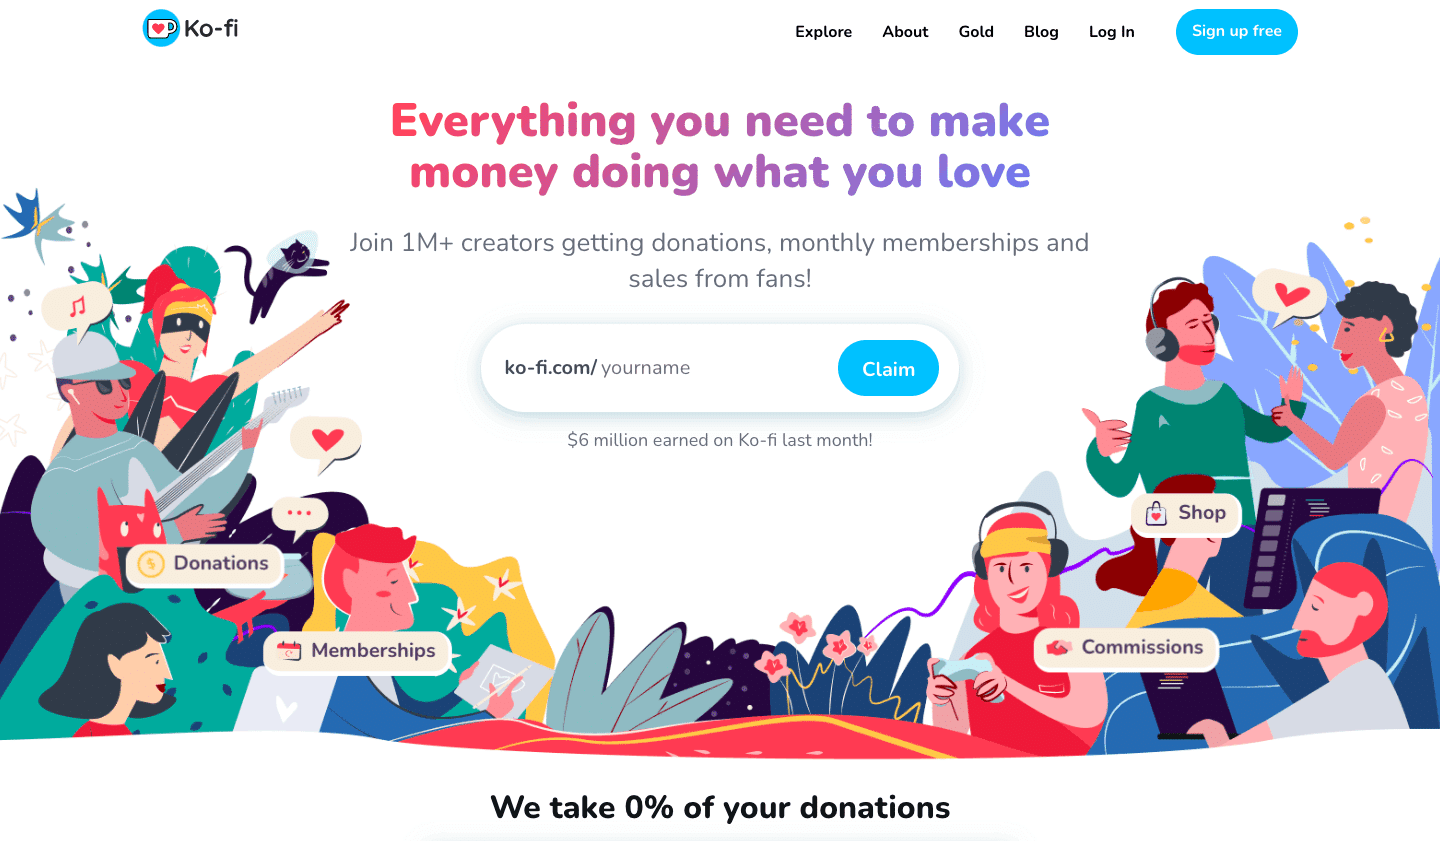 Receive donations and sales from your fans with Ko-fi